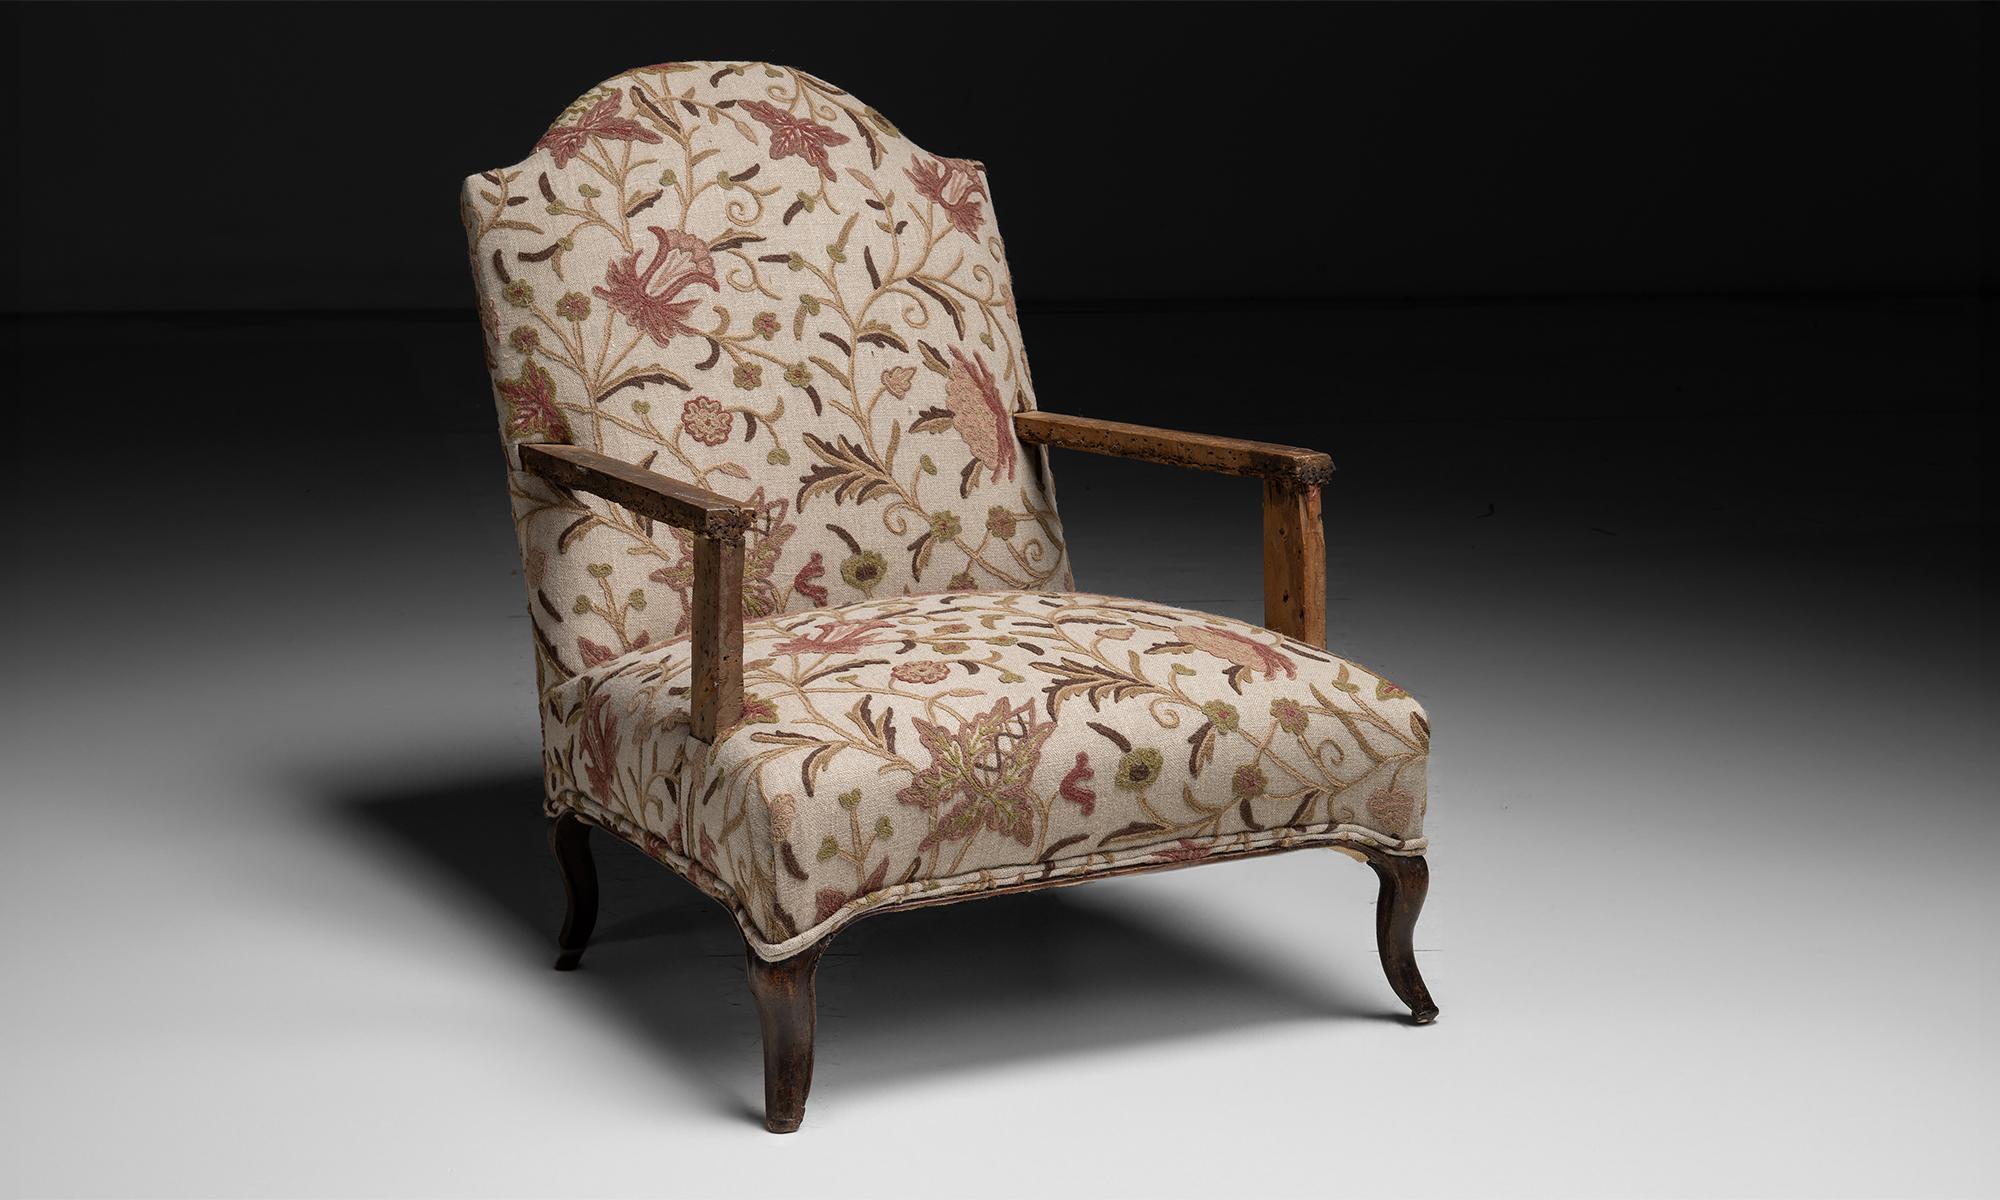 Armchair in Embroidered Linen

France circa 1790

French directoire bergere newly upholstered in embroidered linen blend by Marvic.

28”w x 38”d x 35”h x 14”seat